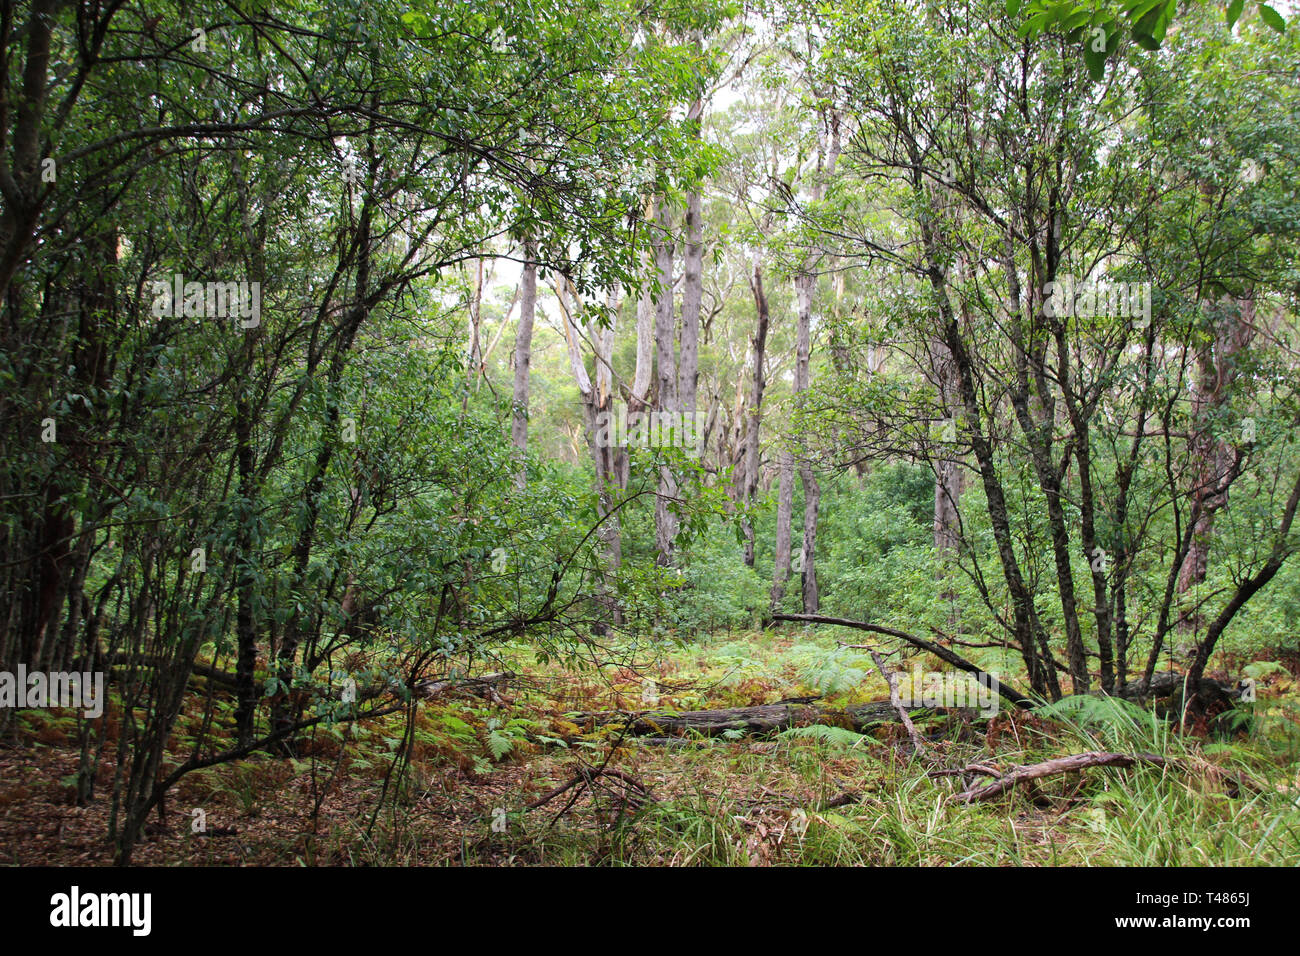 Australian bush forest with native plants and trees Stock Photo